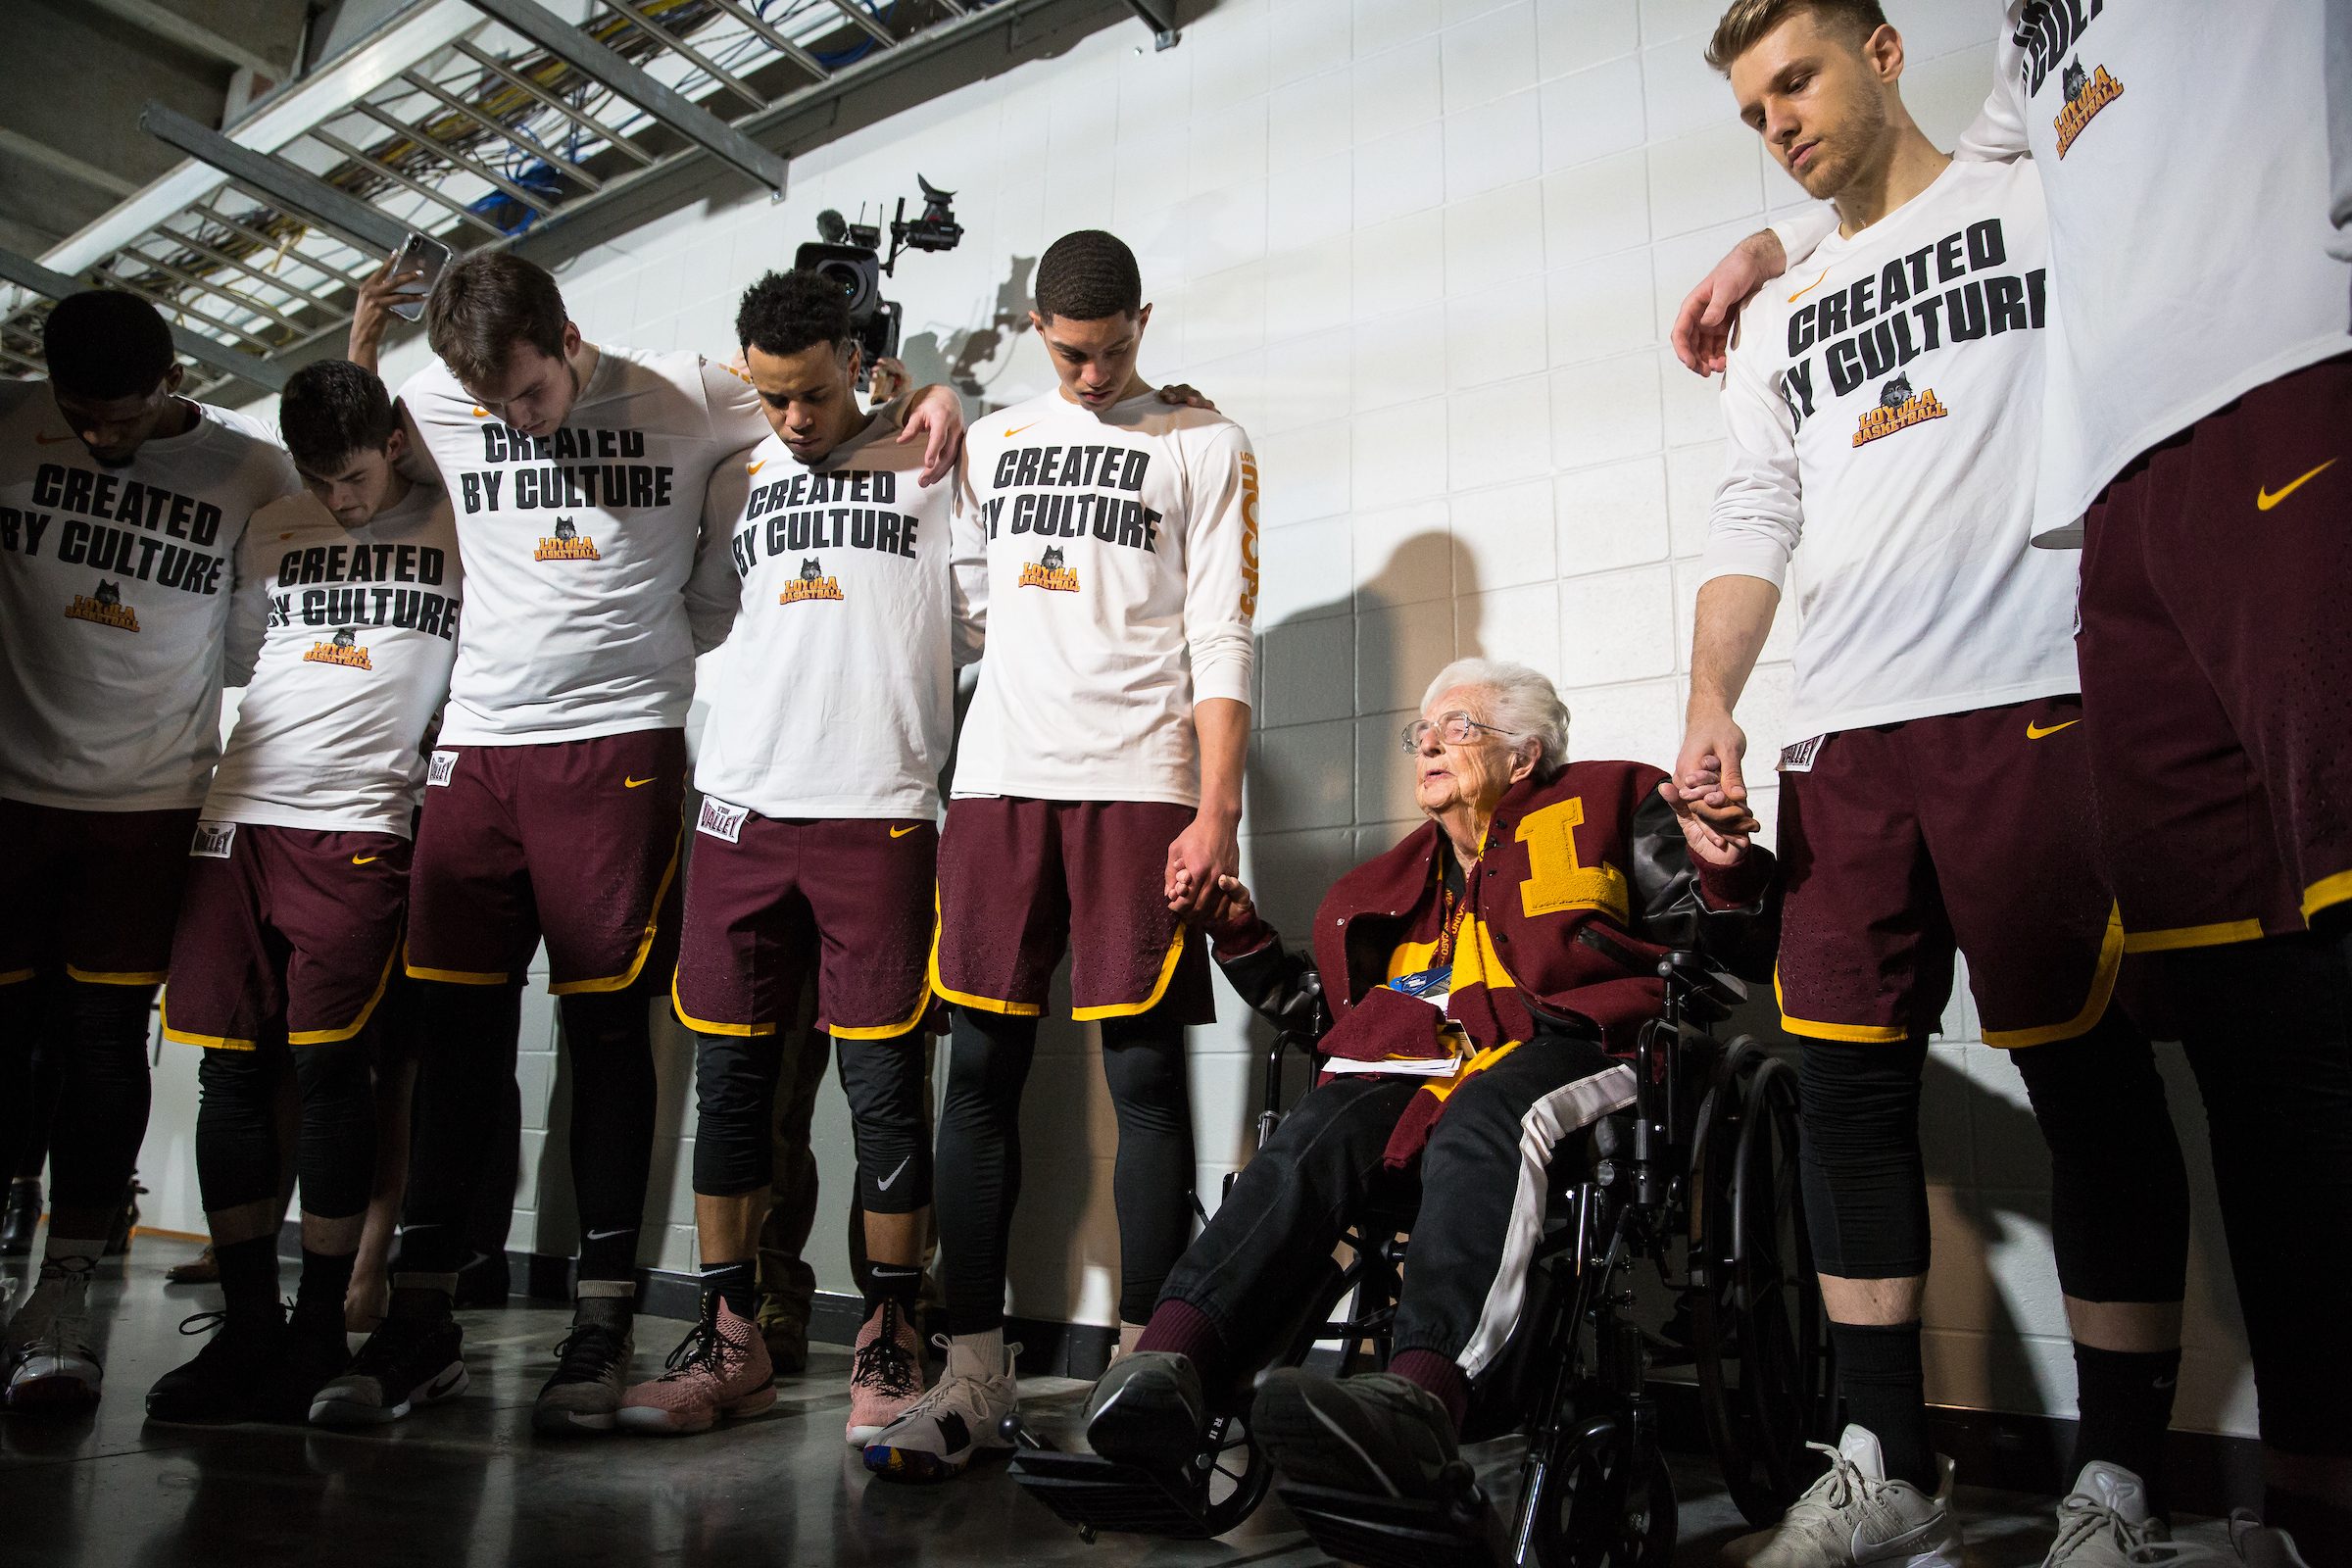 Sister Jean Dolores-Schmidt leads Loyola University Chicago  players in prayer before competing in the Elite Eight round in the NCAA Tournament against Kansas State at Philips Arena in Atlanta, GA., on Saturday, March 24, 2018. (Photo: Lukas Keapproth)